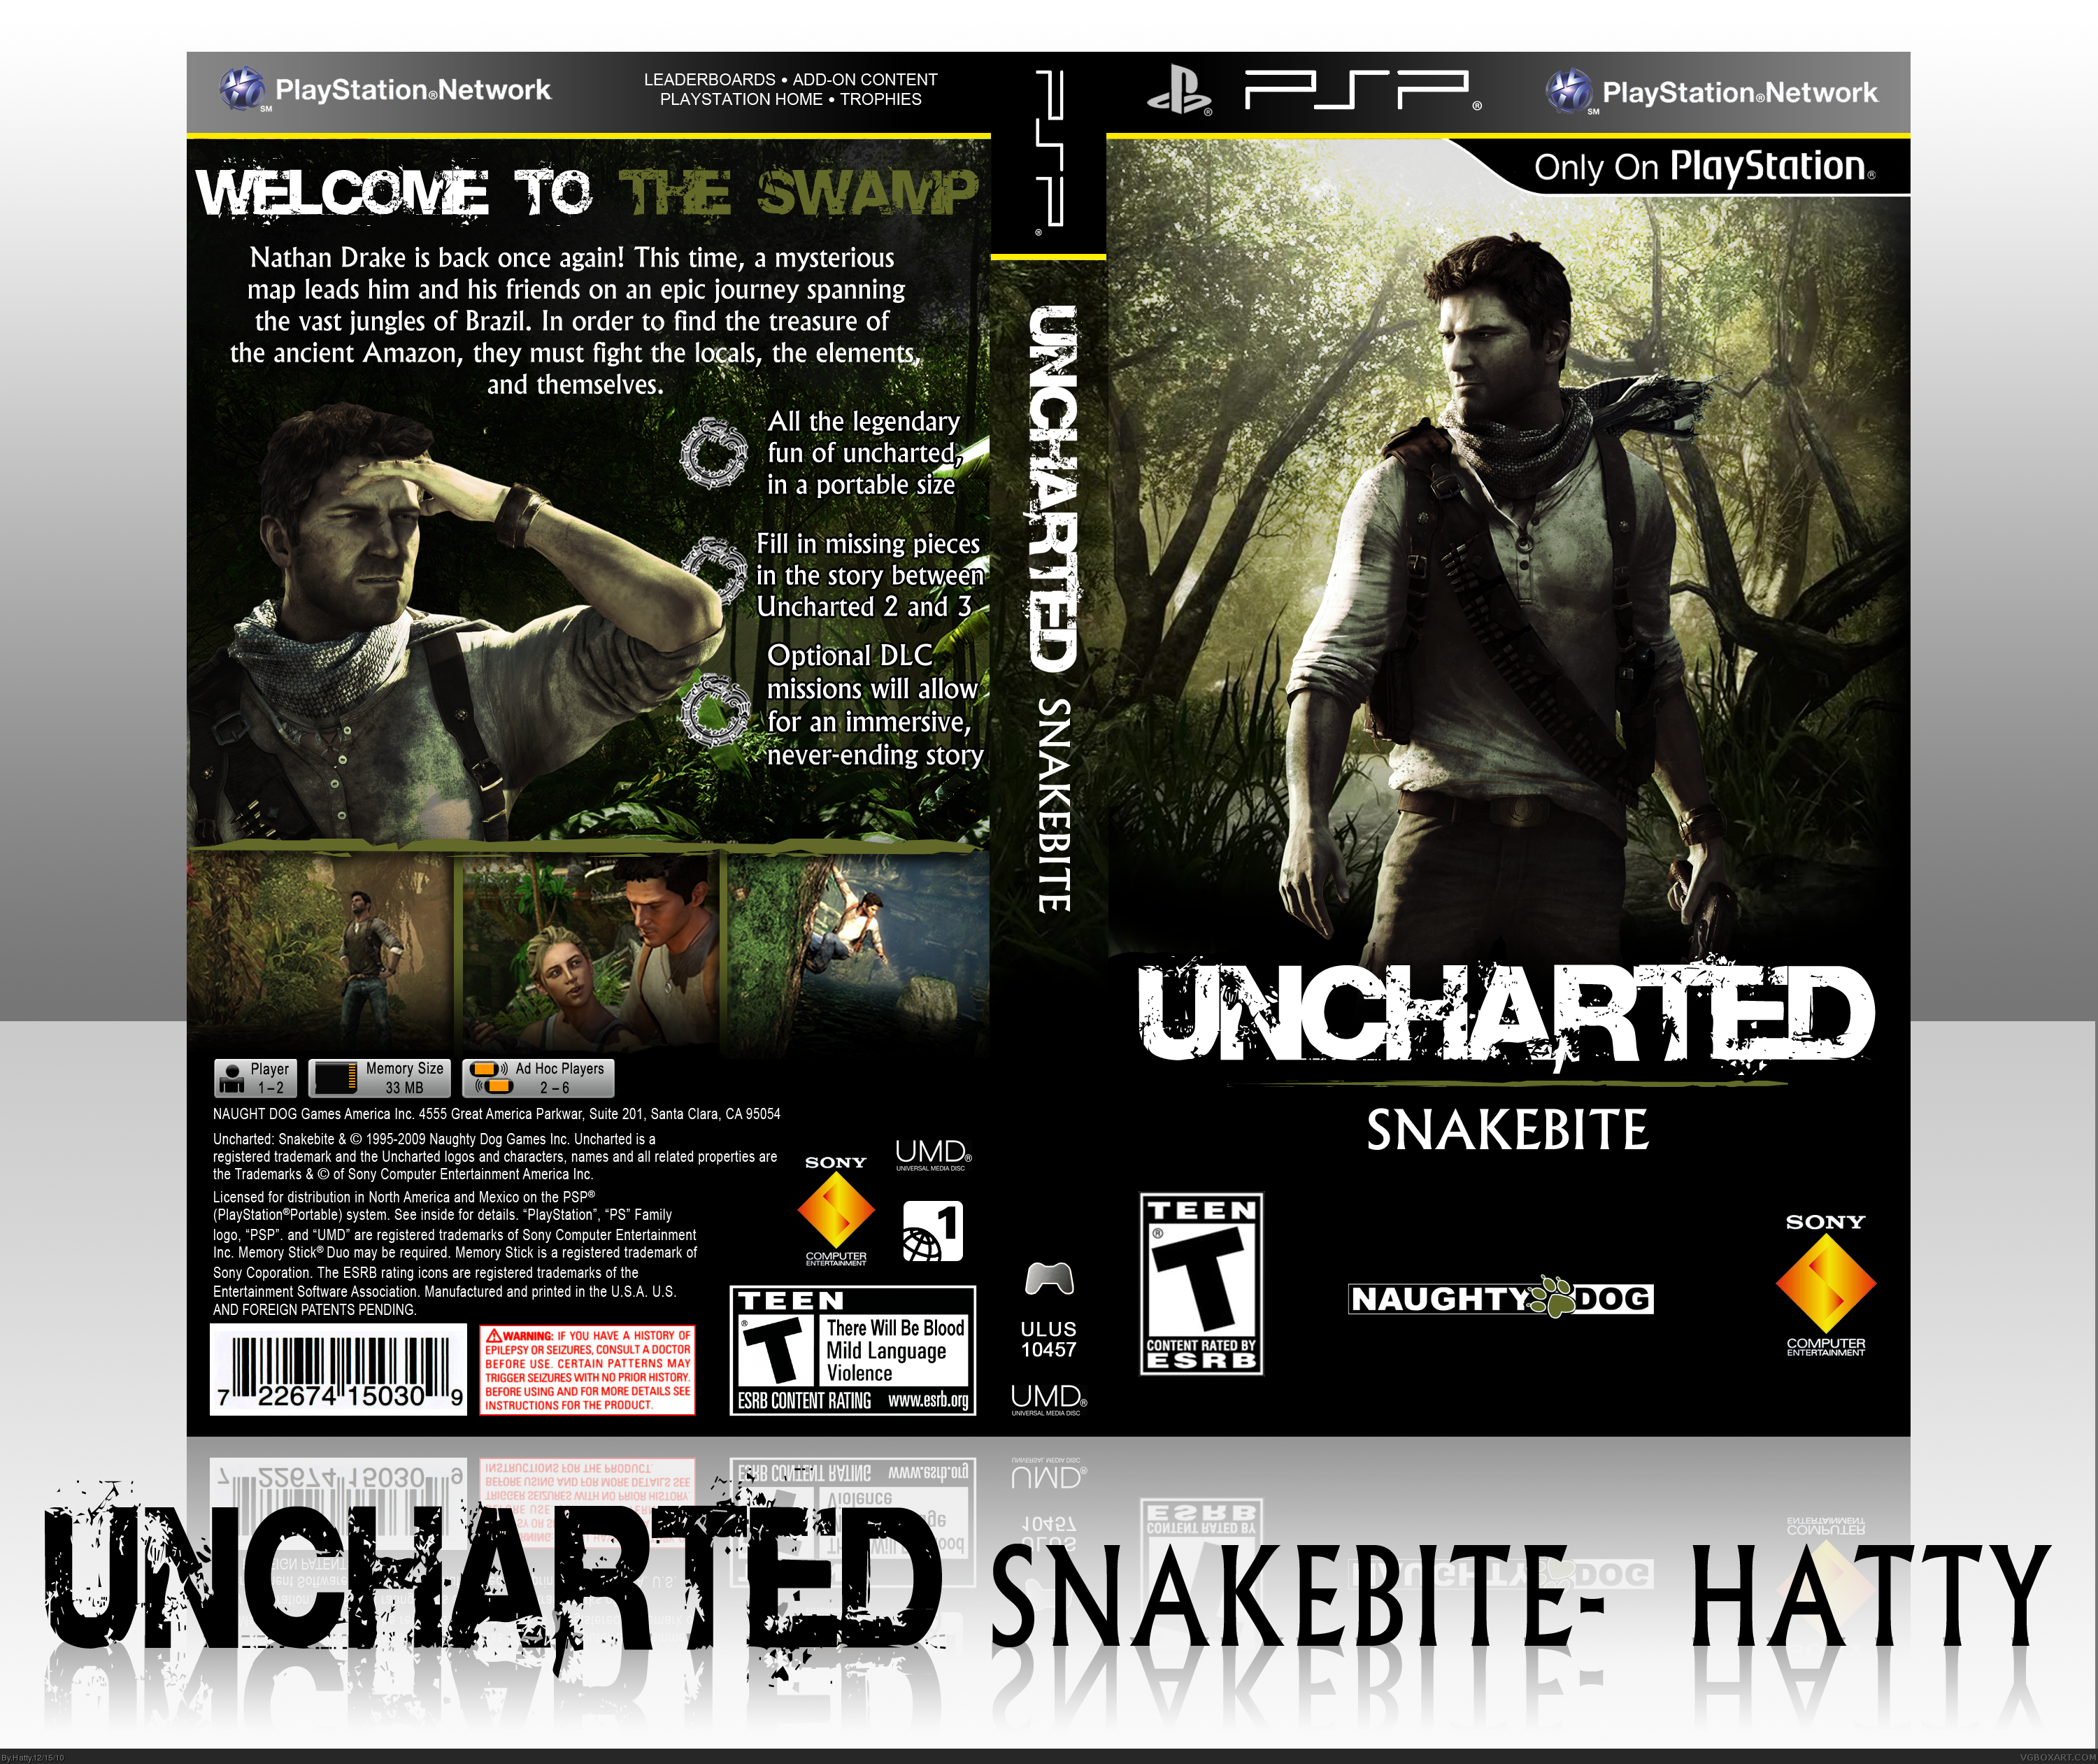 Uncharted: Snakebite box cover